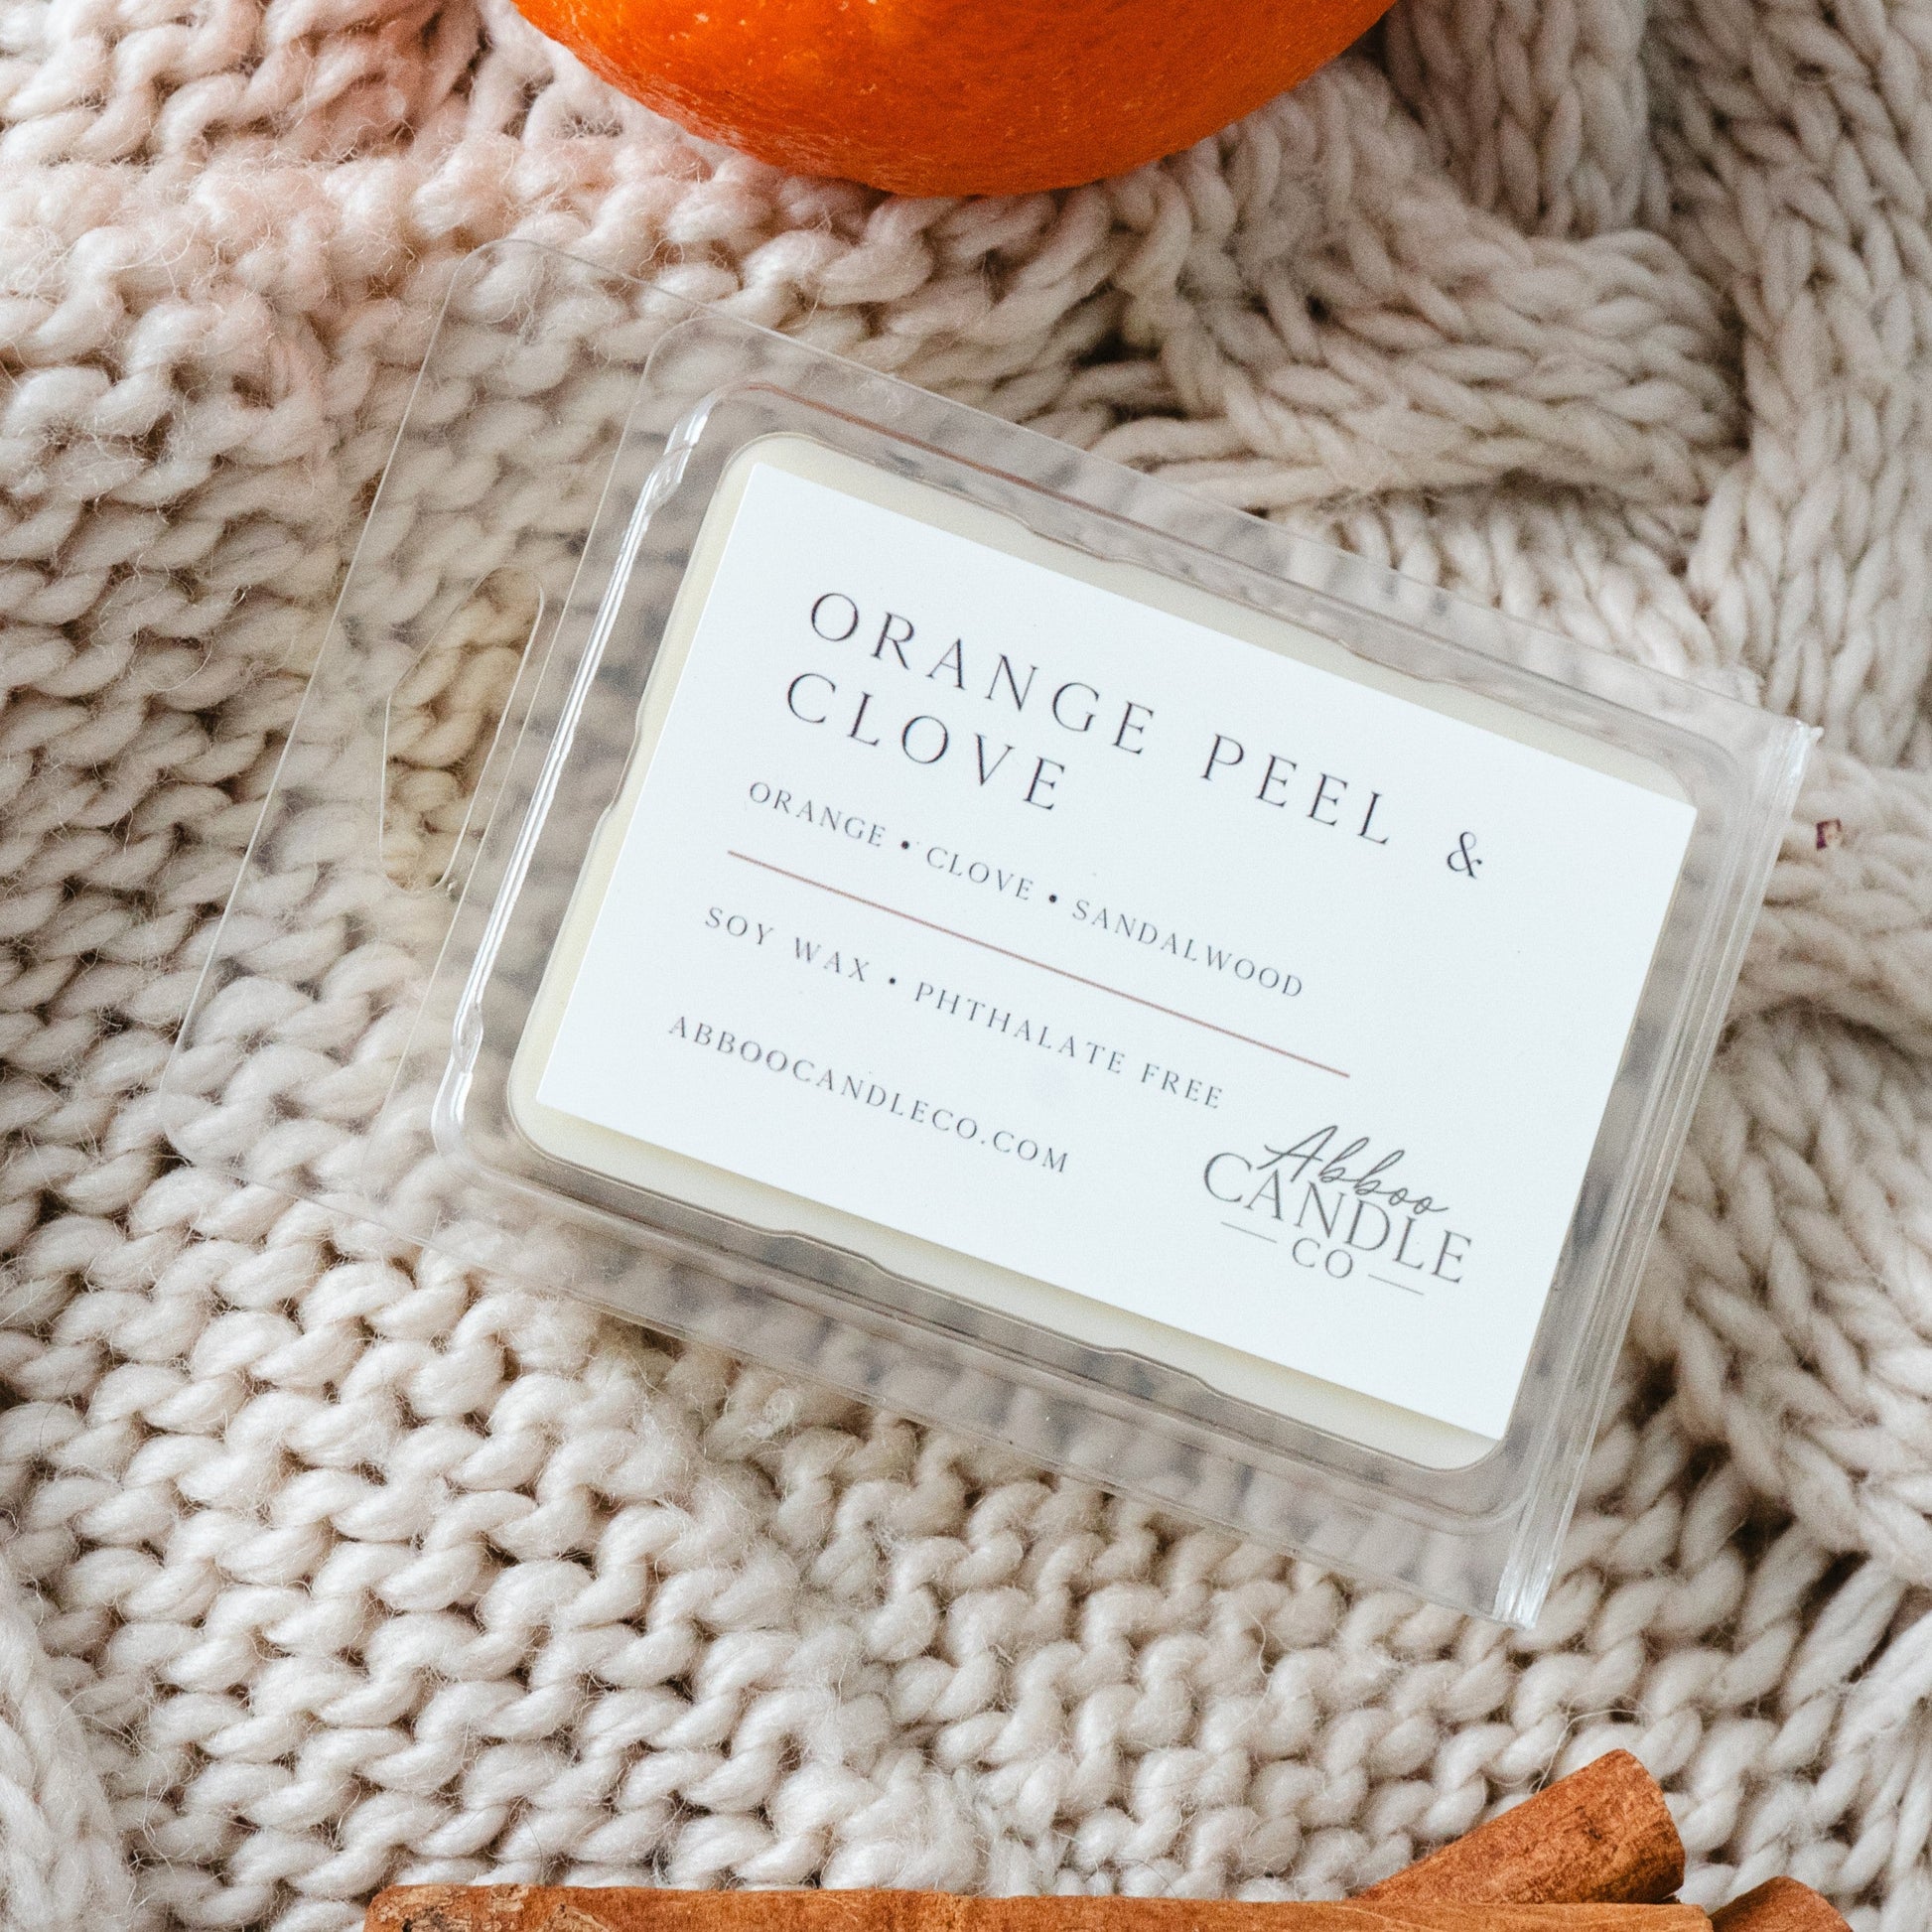 Orange Peel and Clove Soy Wax Melts - Abboo Candle Co® Wholesale